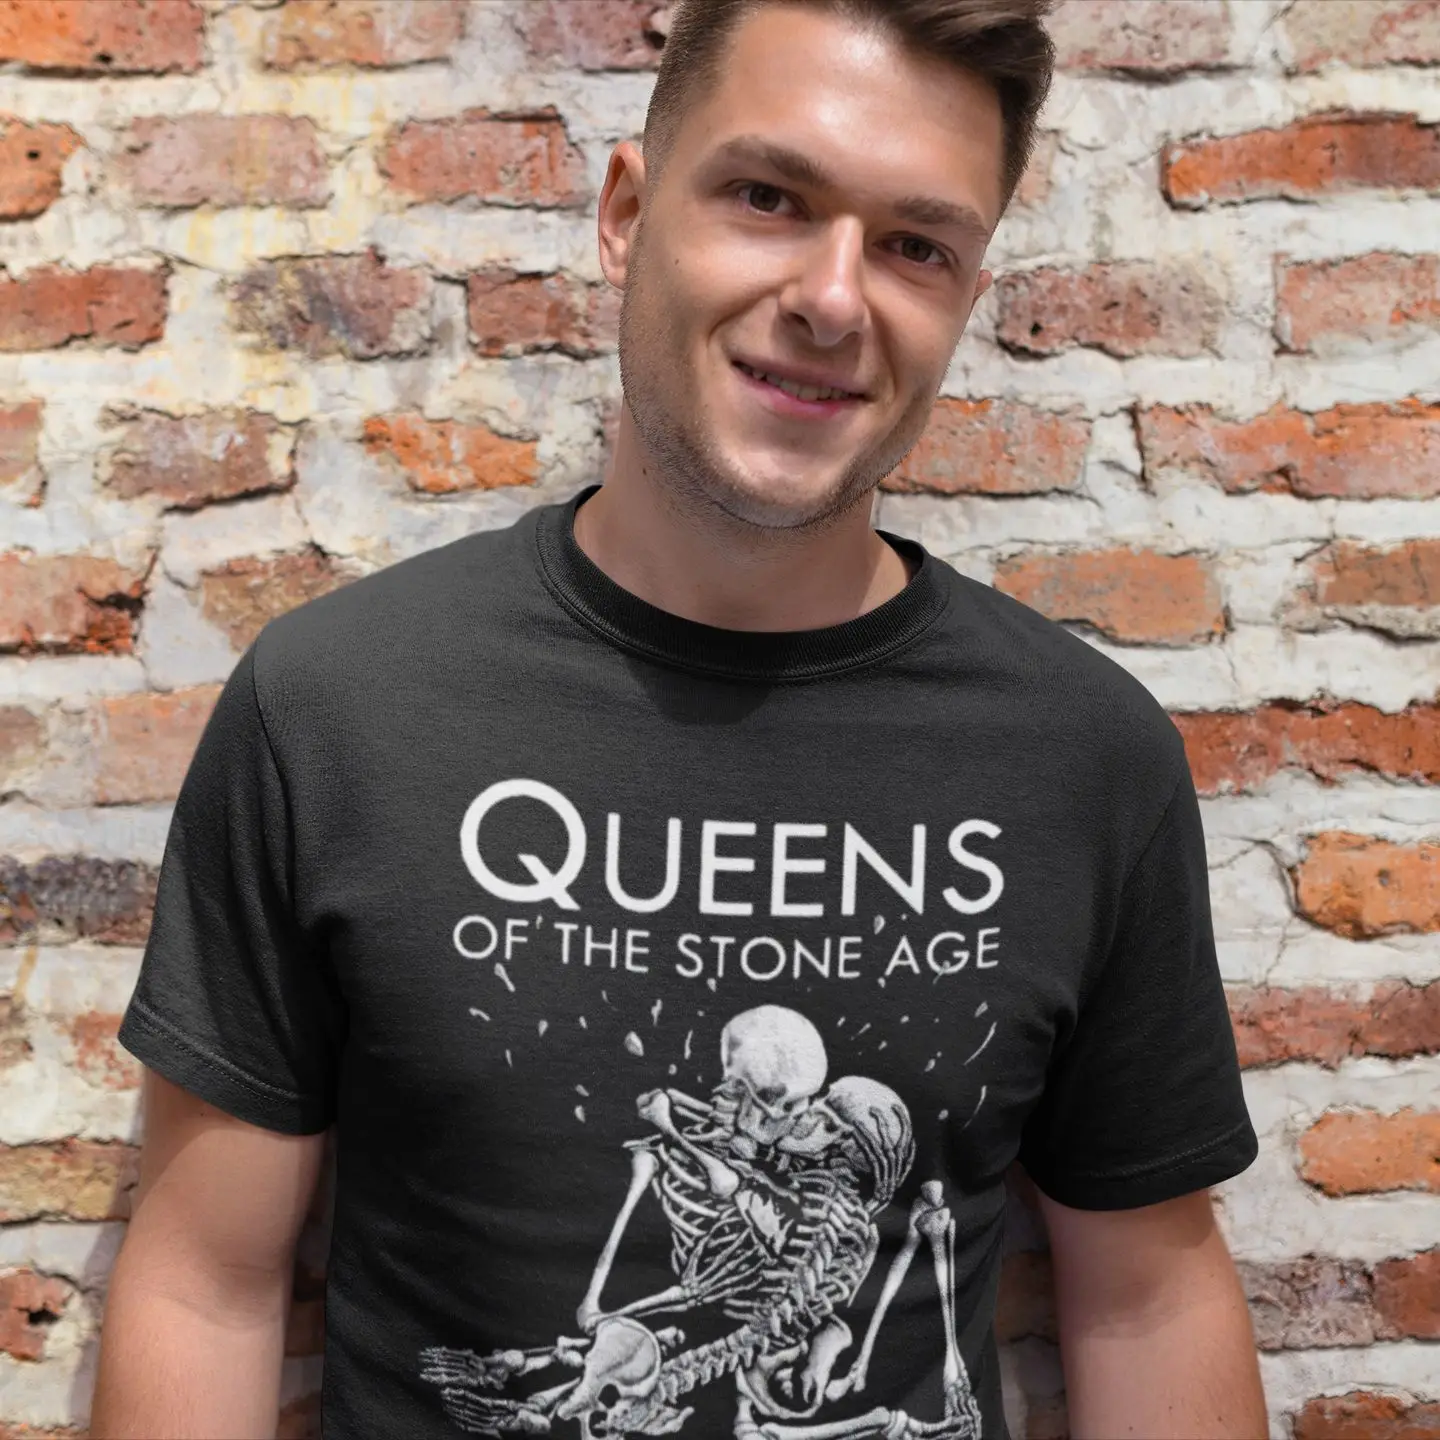 

Queens Of The Stone Age T-Shirt Skeleton Kiss Basic Fun 100 Percent Cotton T Shirt Graphic Short-Sleeve Tshirt Men Oversize